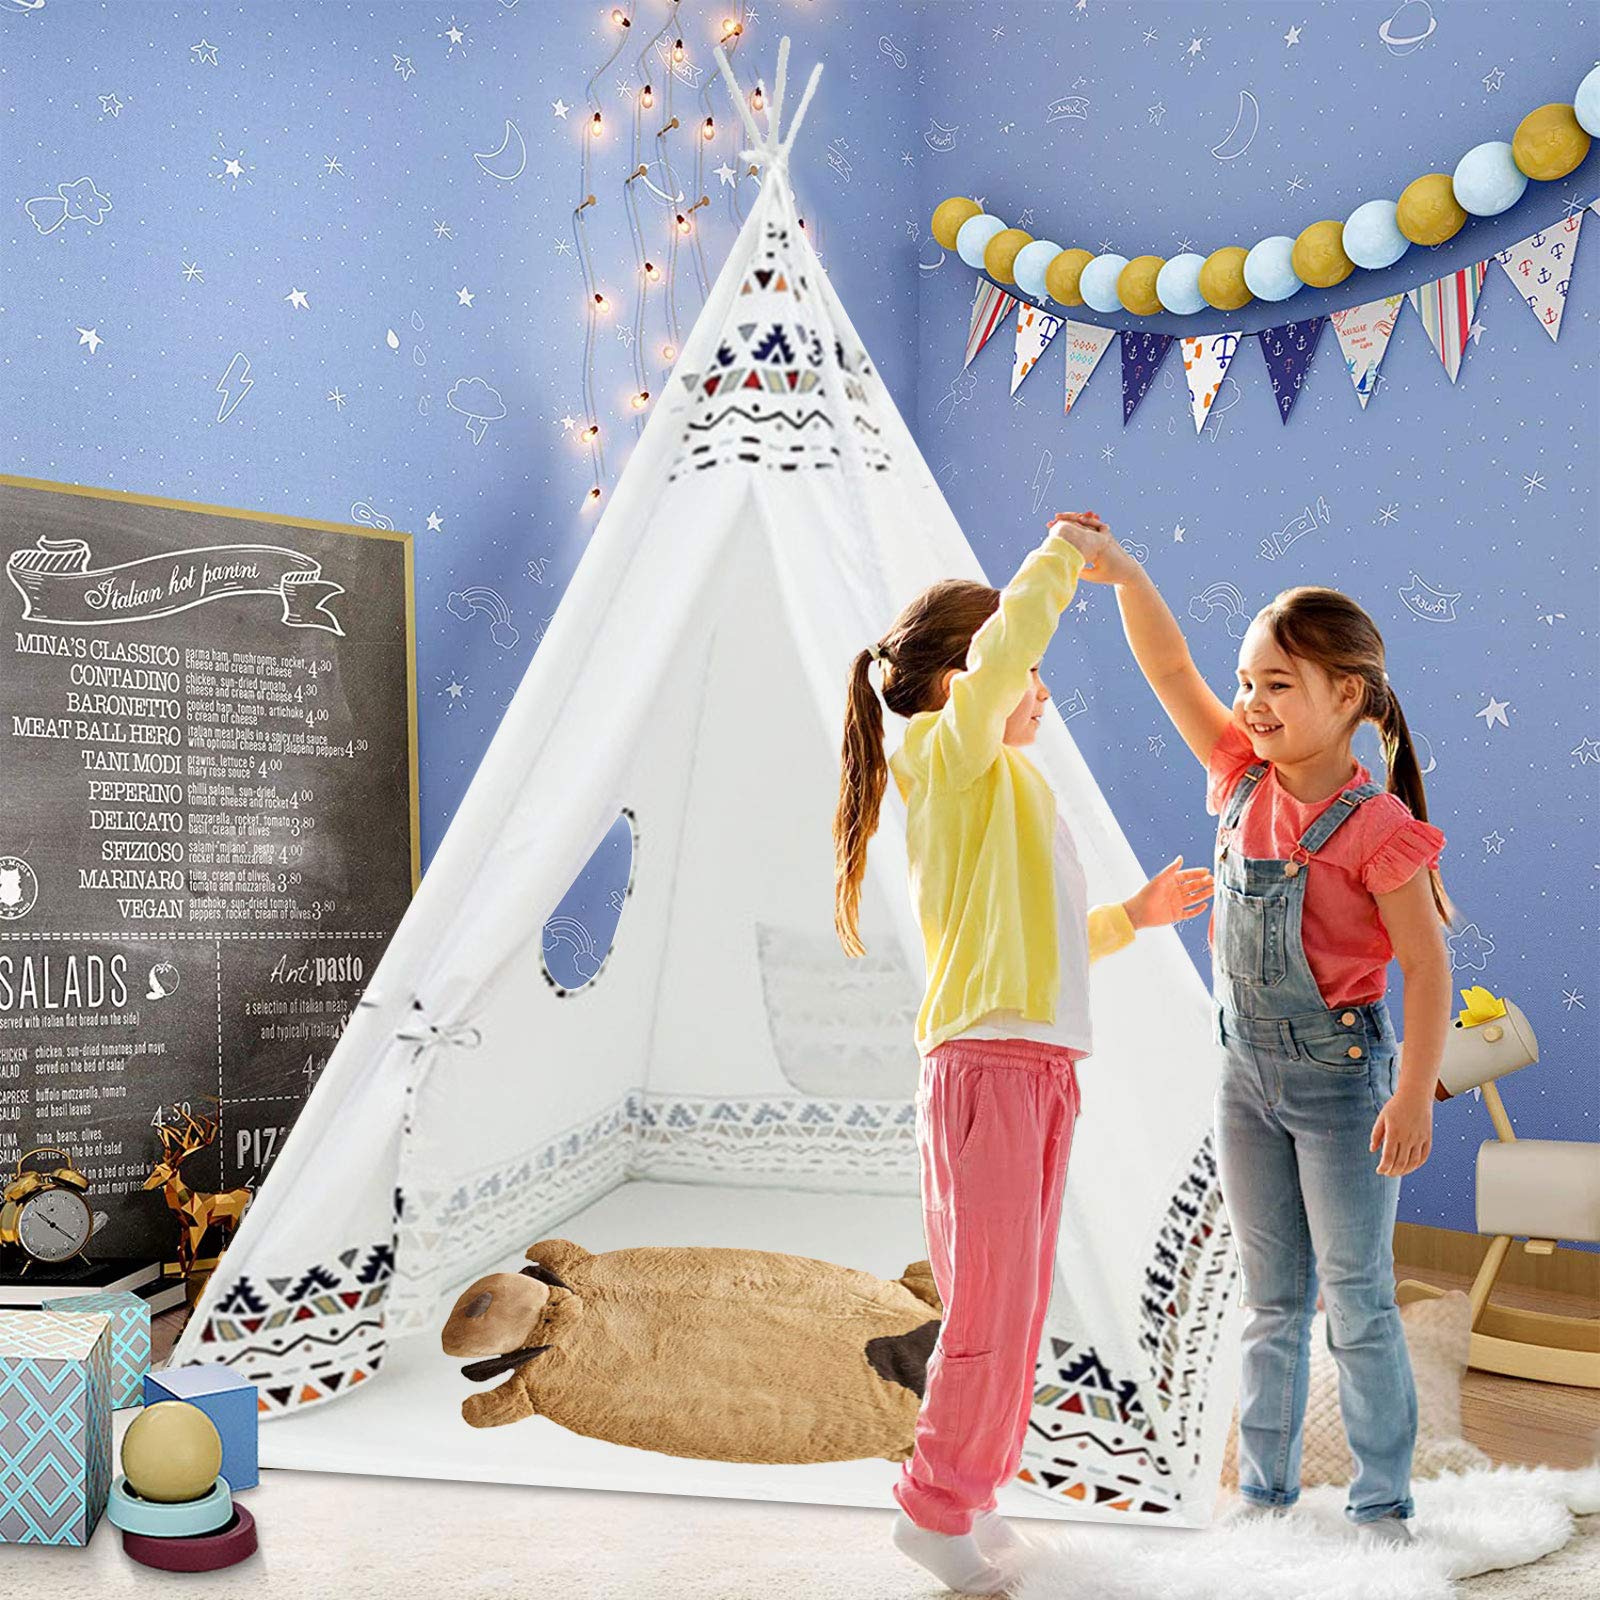 OEM Customized Children Tent - Arkmiido Teepee Tent for Kids Raw White Canvas Teepee with Windows Carry Case Foldable Children Play Tents Playhouse Toys for Baby Toddler Girls/Boys Indoor & Ou...